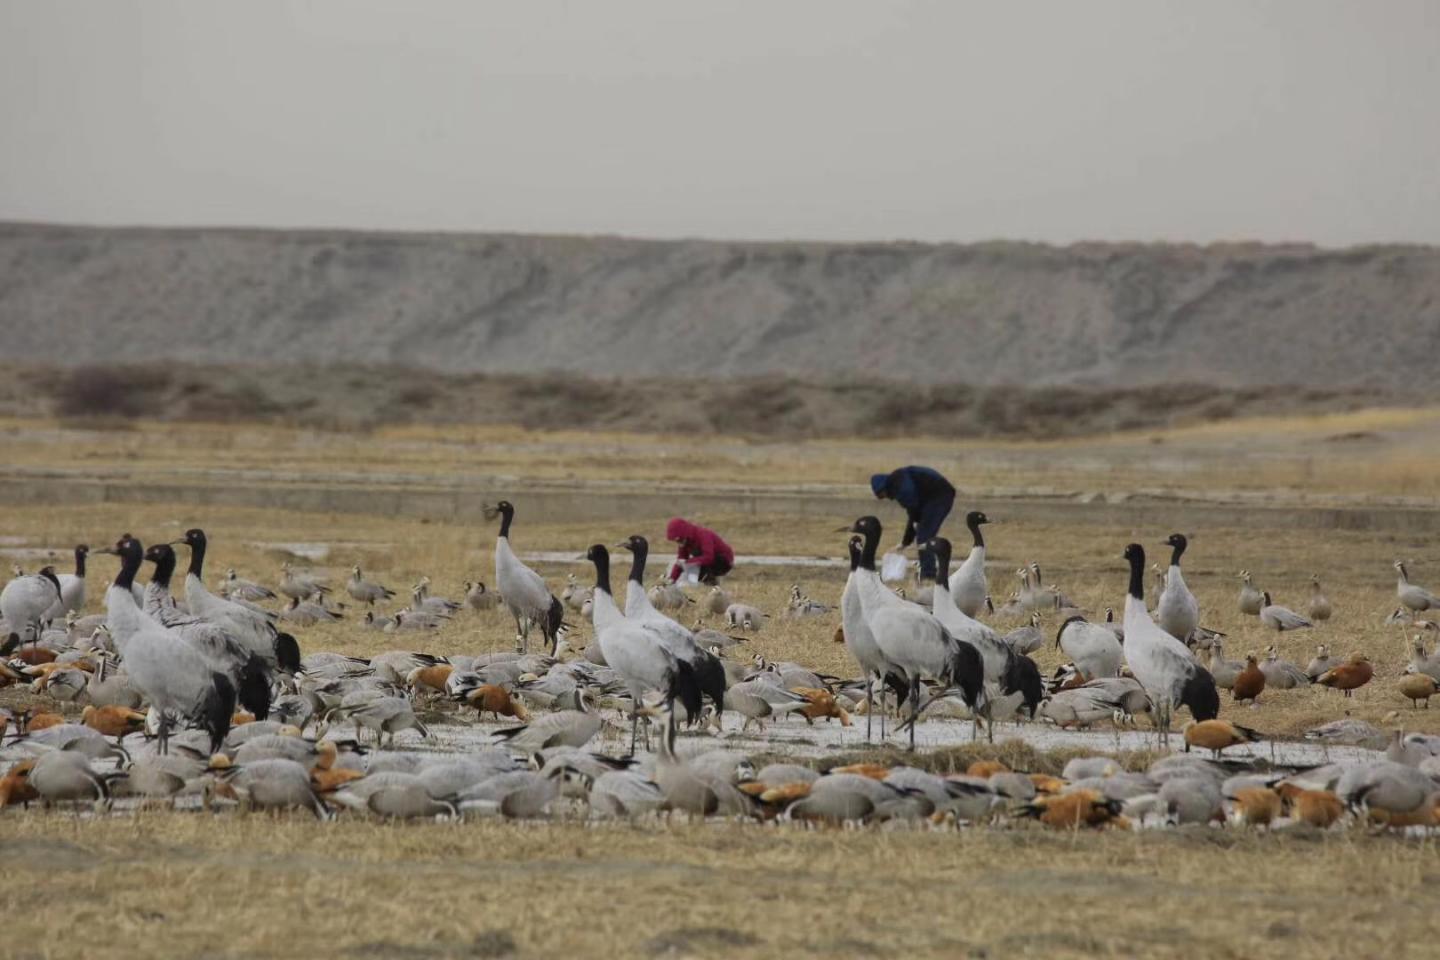 Black-Necked Cranes (Grus Nigricollis) and Bar-Headed Geese (Anser Indicus) in the Yarlung Tsangpo R